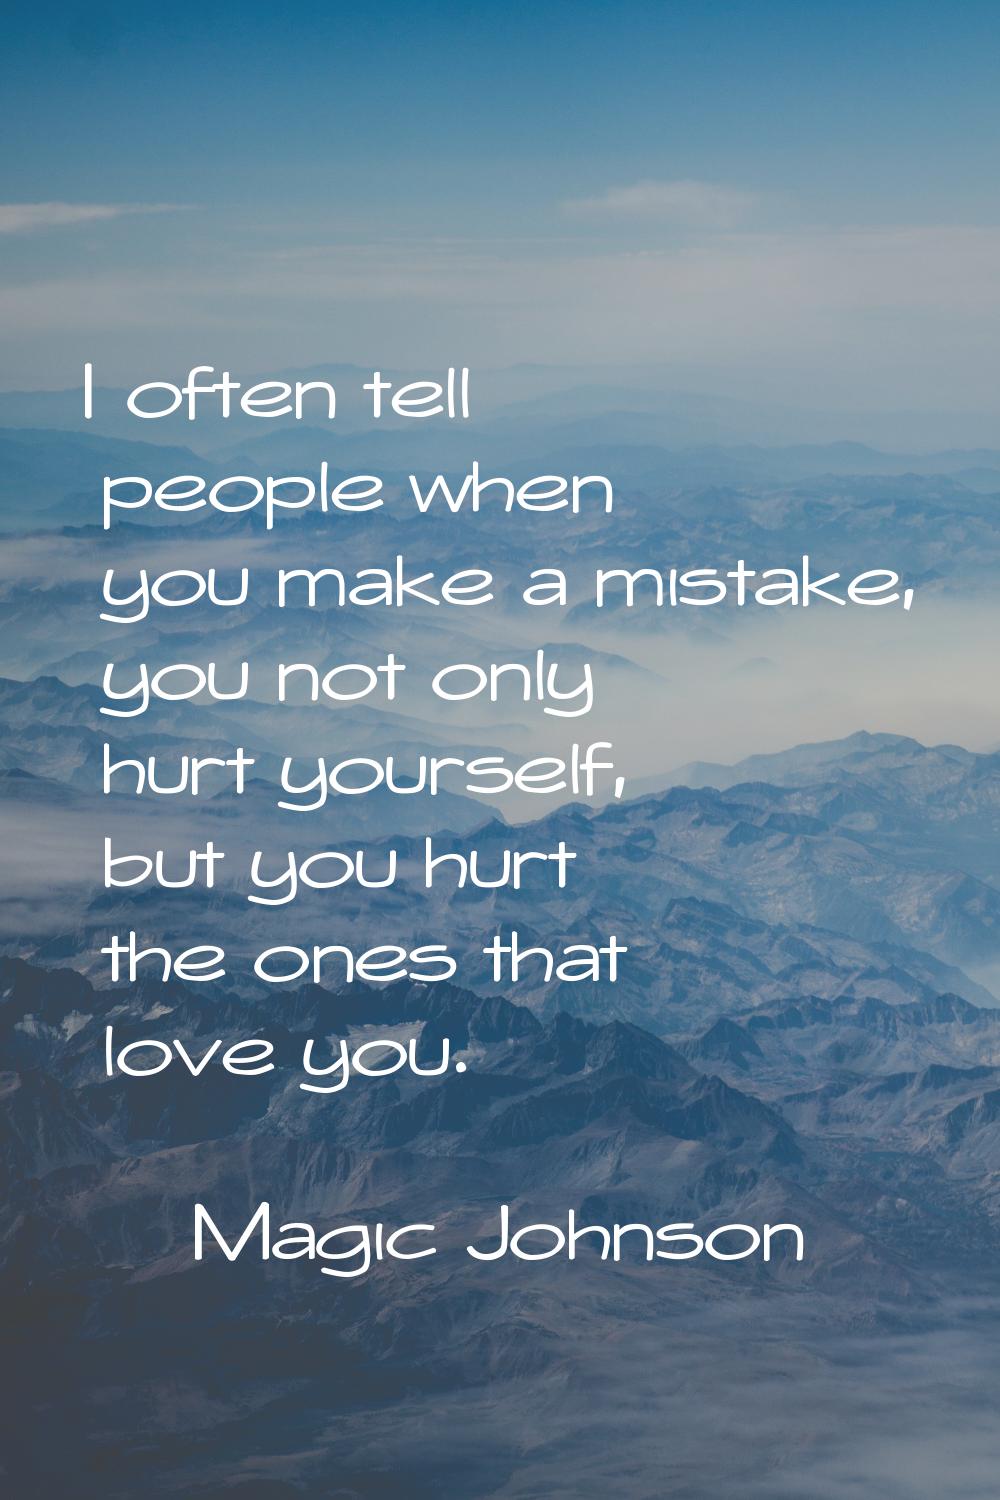 I often tell people when you make a mistake, you not only hurt yourself, but you hurt the ones that